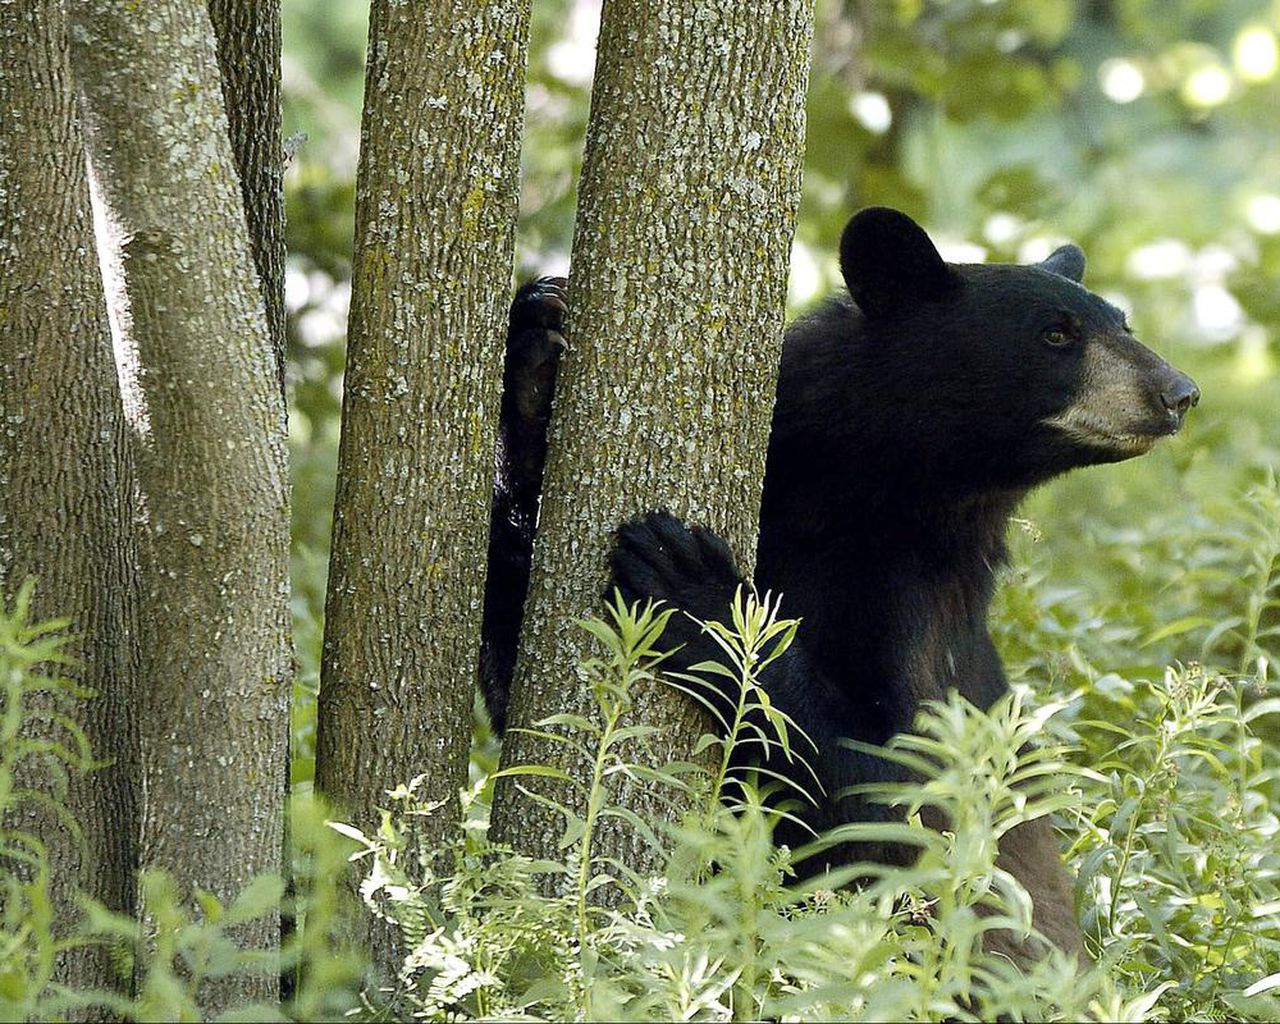 The Big Debate: Should there be a spring bear hunt?